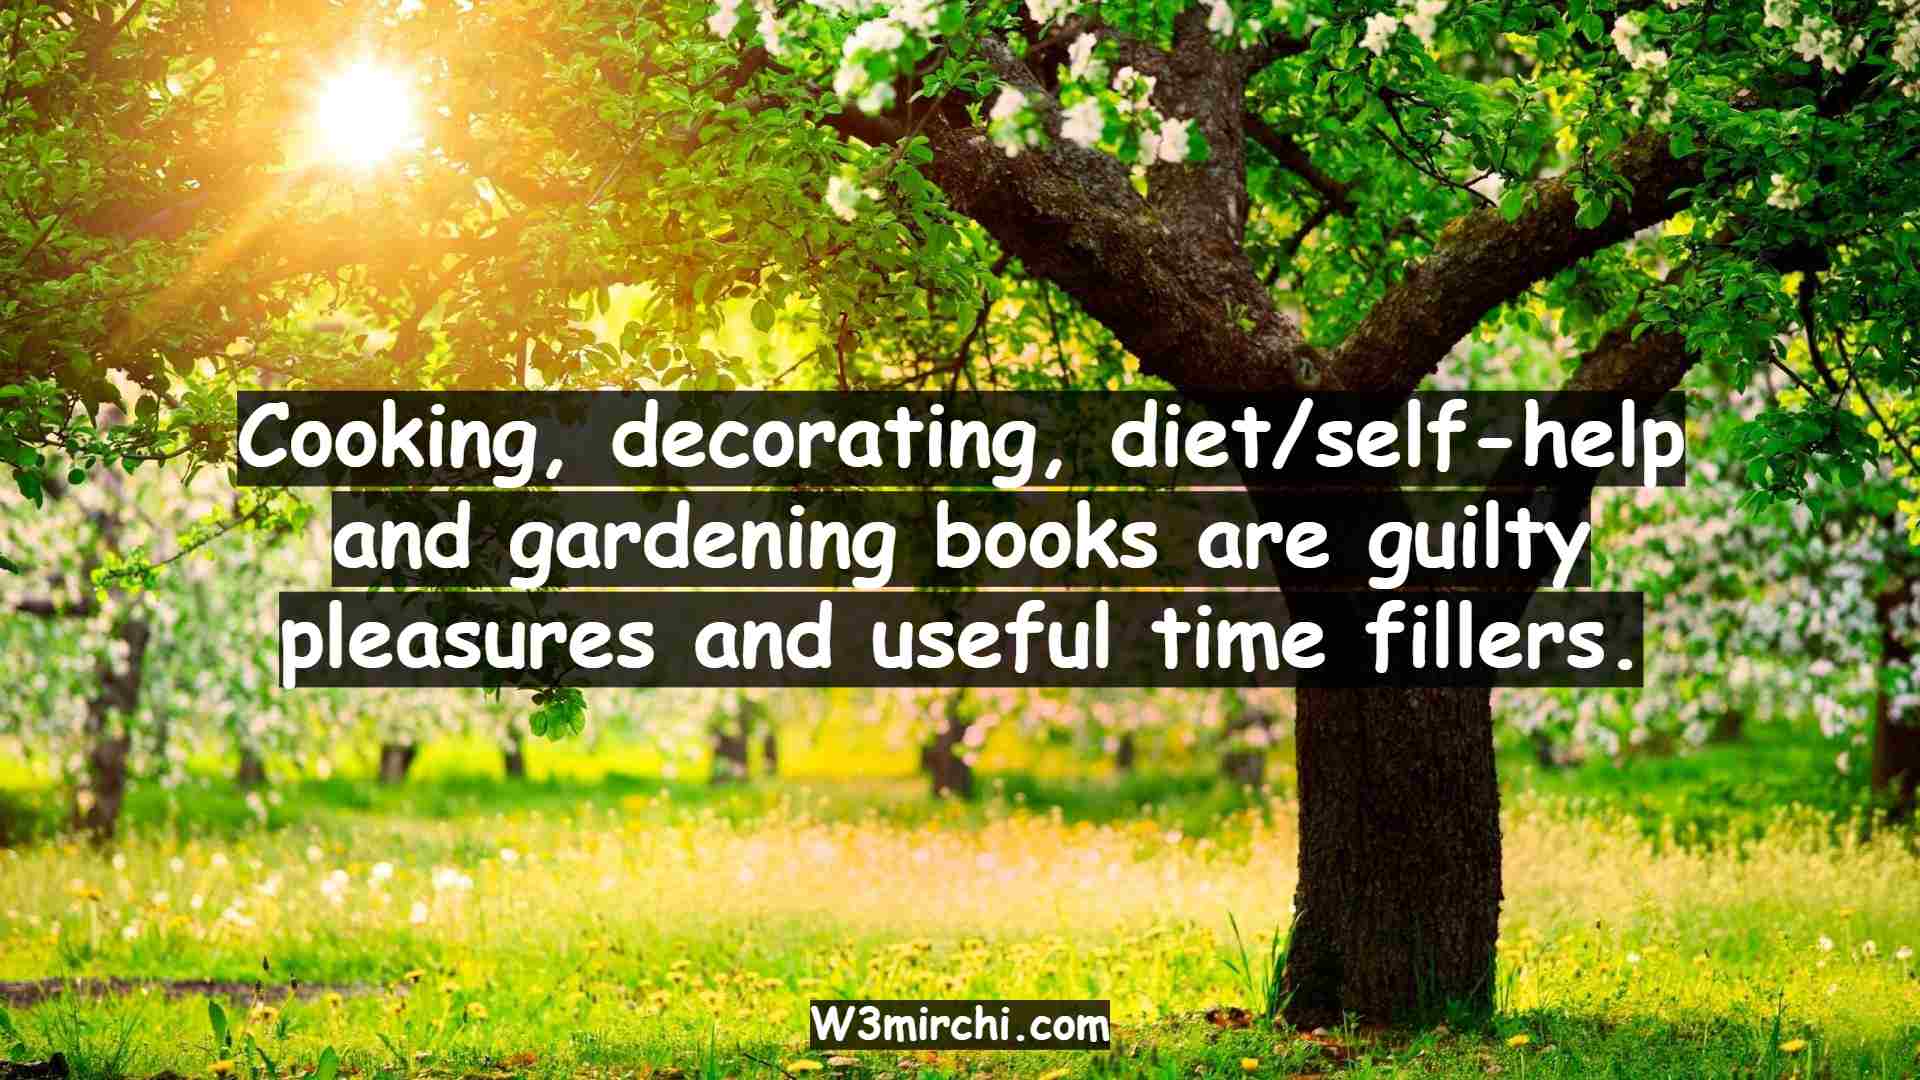 Cooking, decorating, diet/self-help and